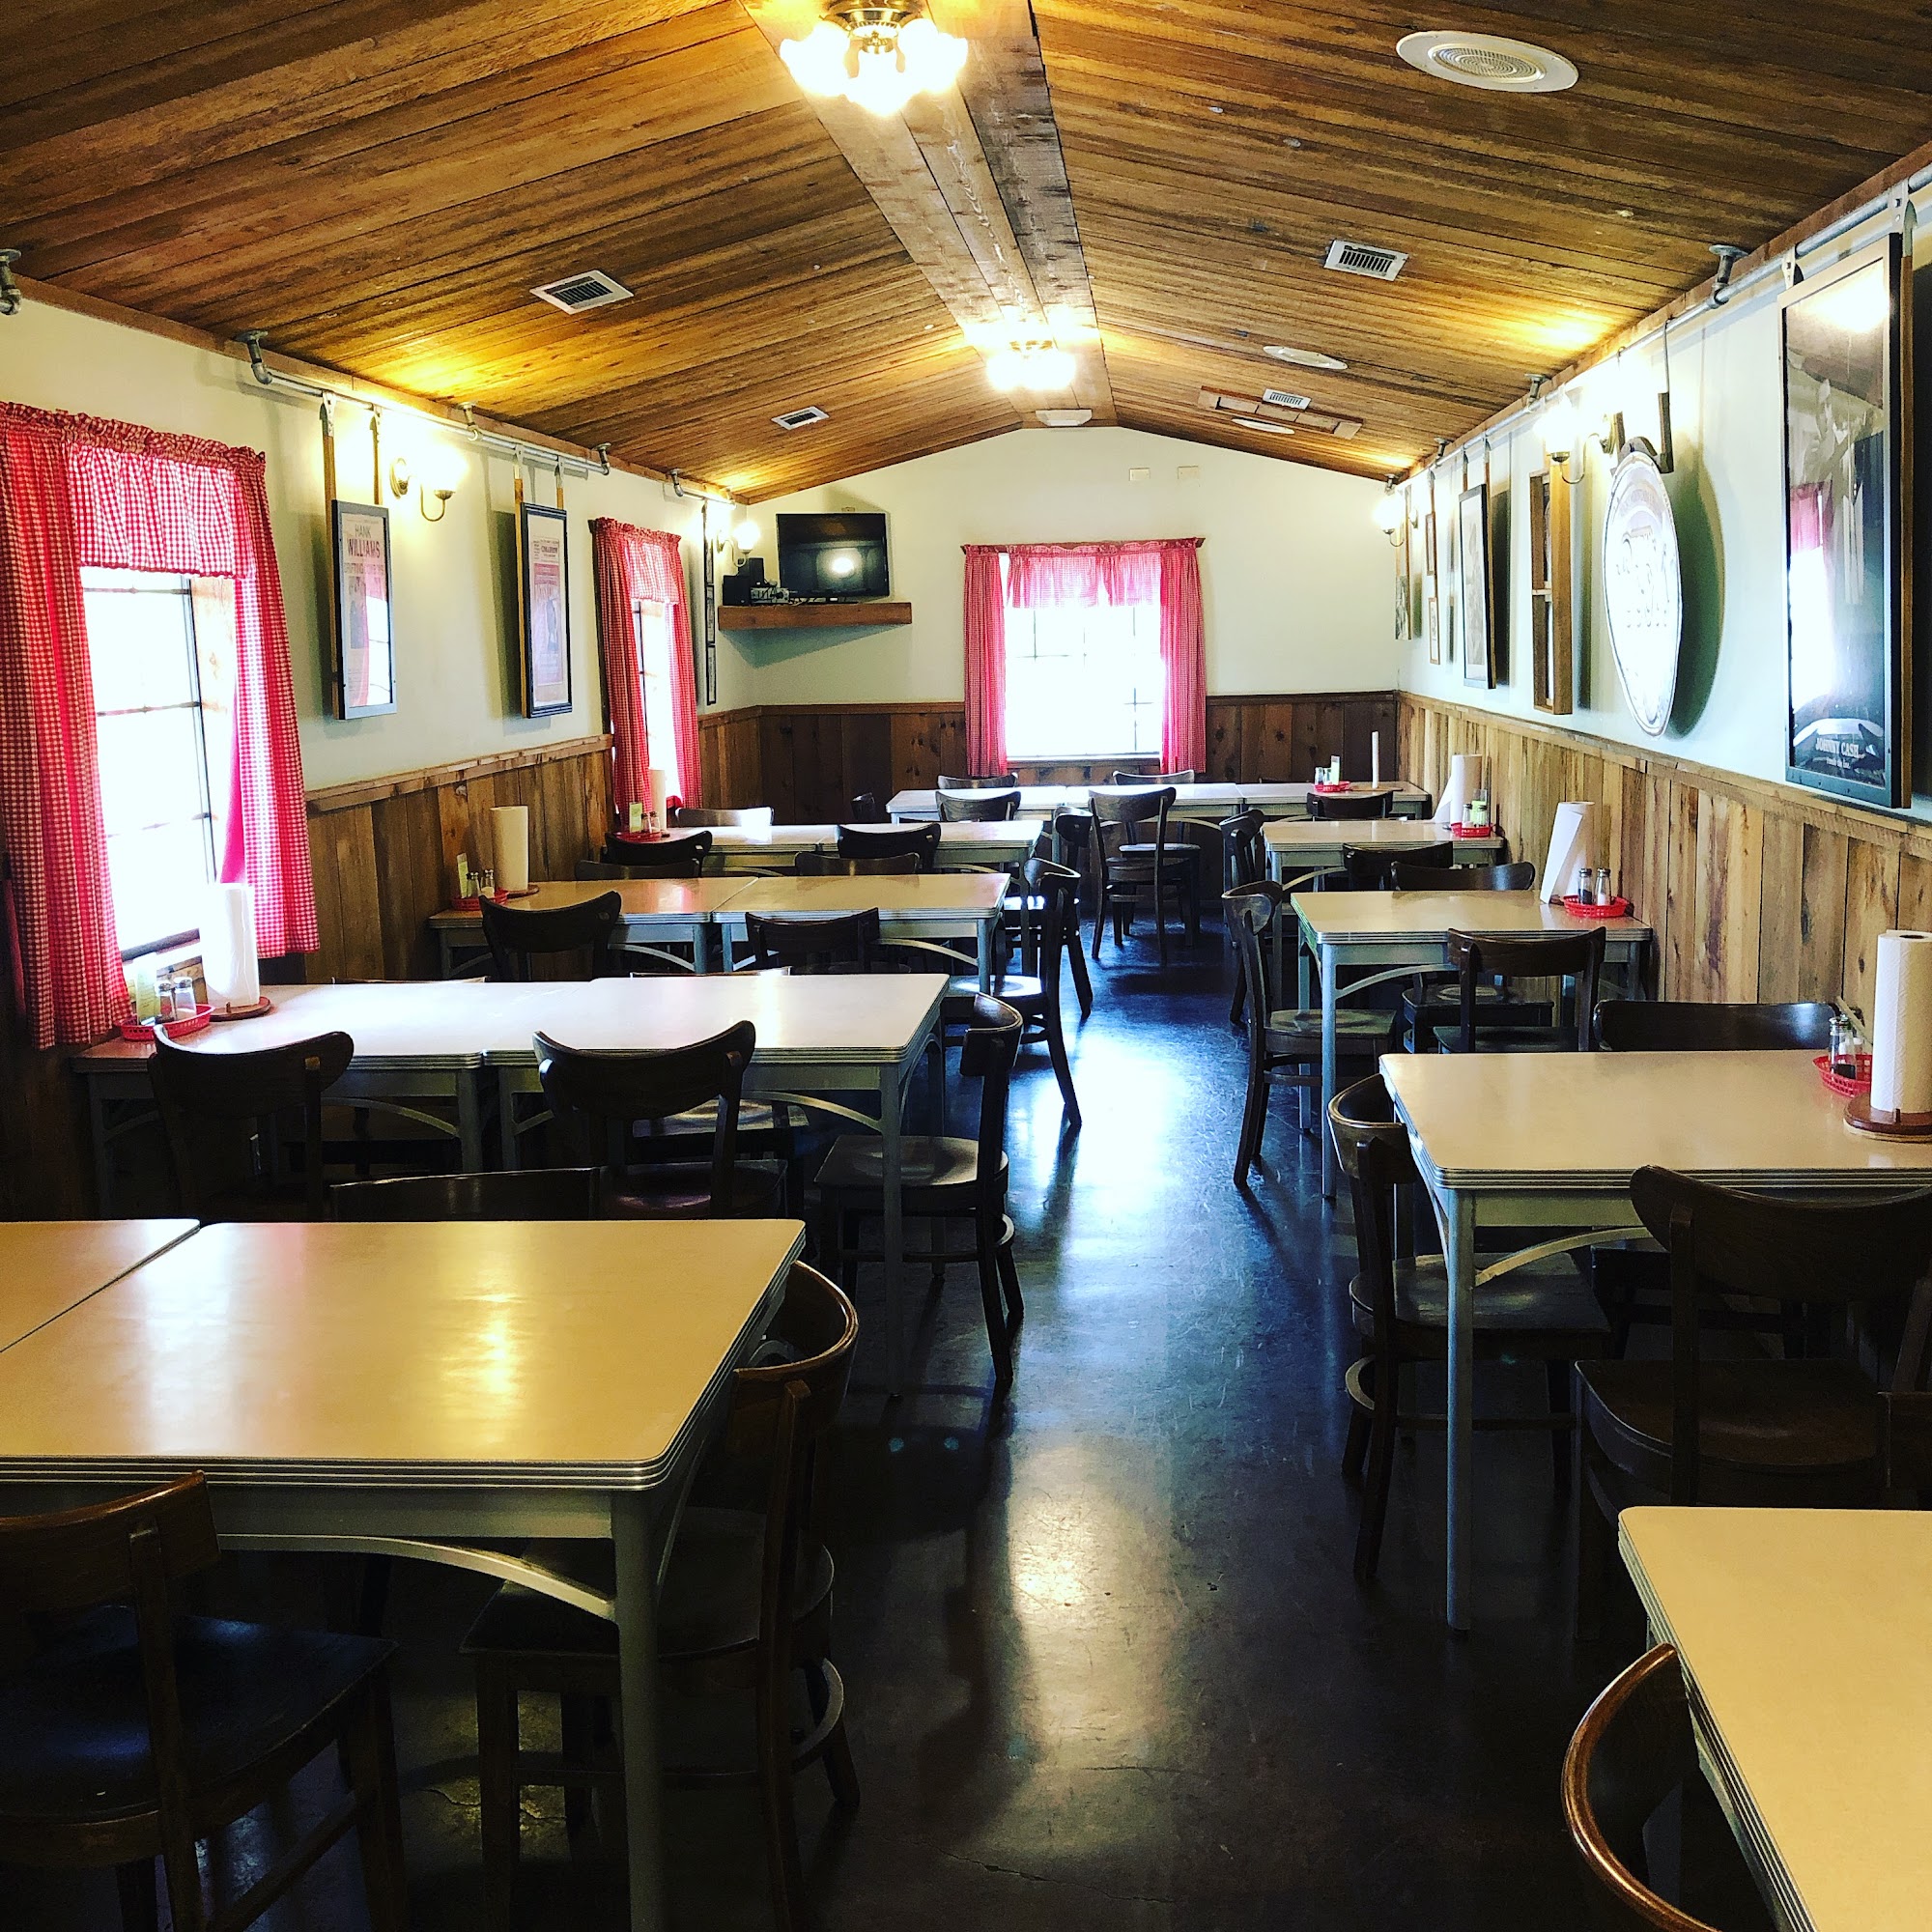 Hickory Hollow Restaurant and Catering